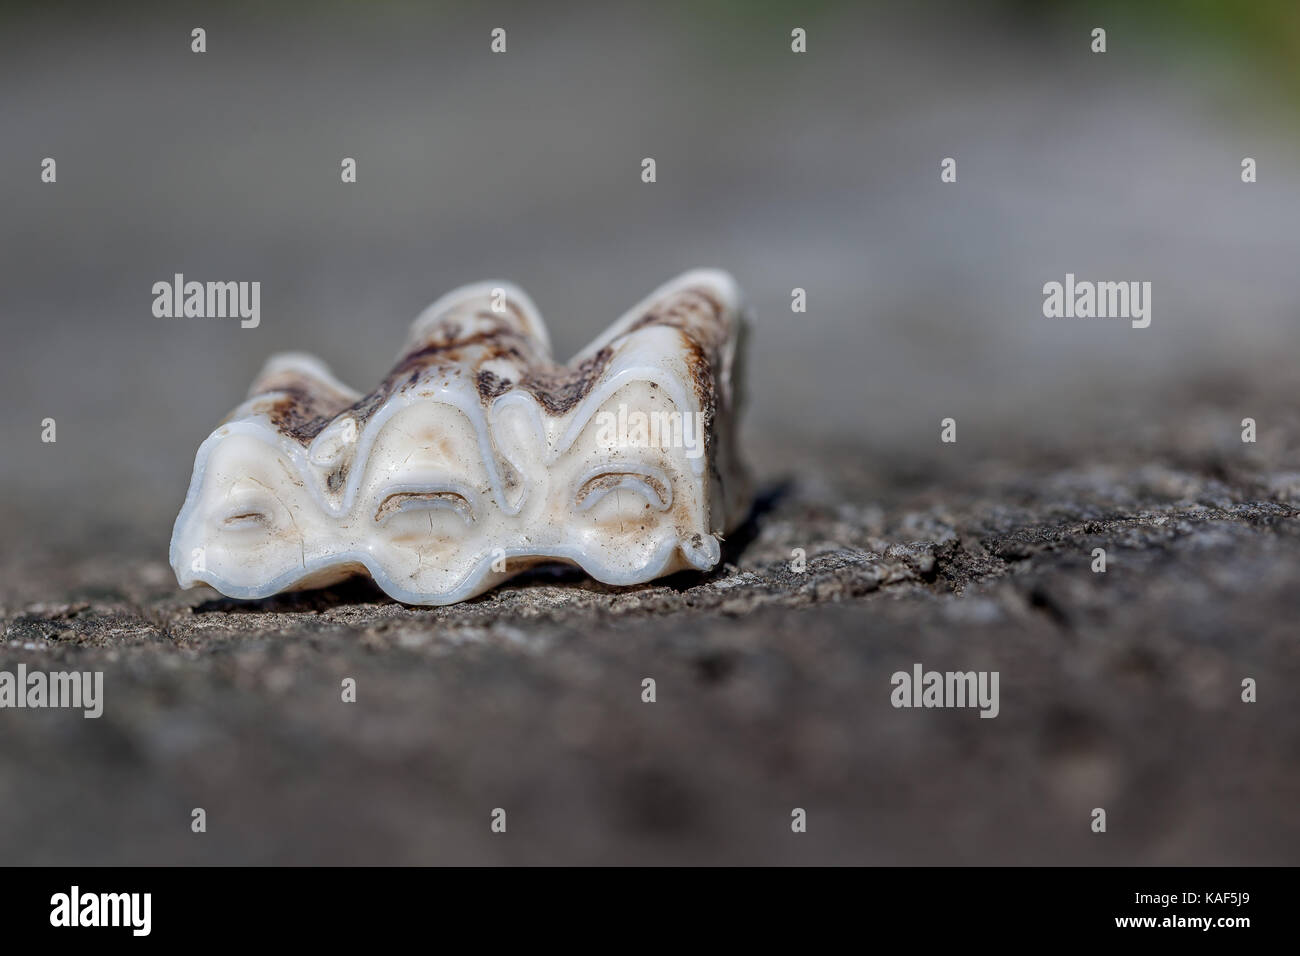 A cow's tooth in Mew Zealand that has fallen out. Stock Photo